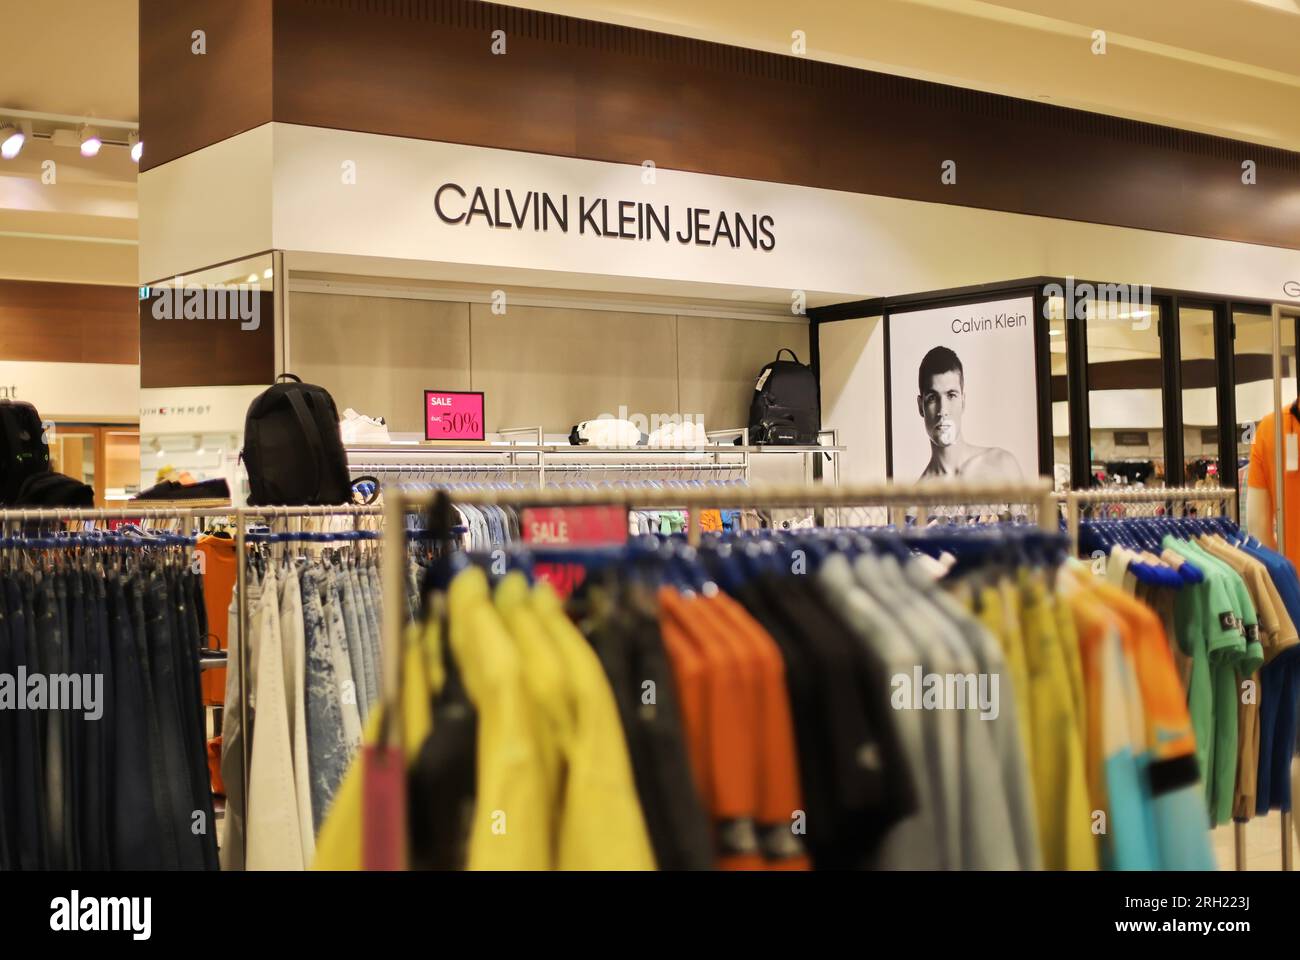 Calvin klein store front inside an American mall Stock Photo - Alamy